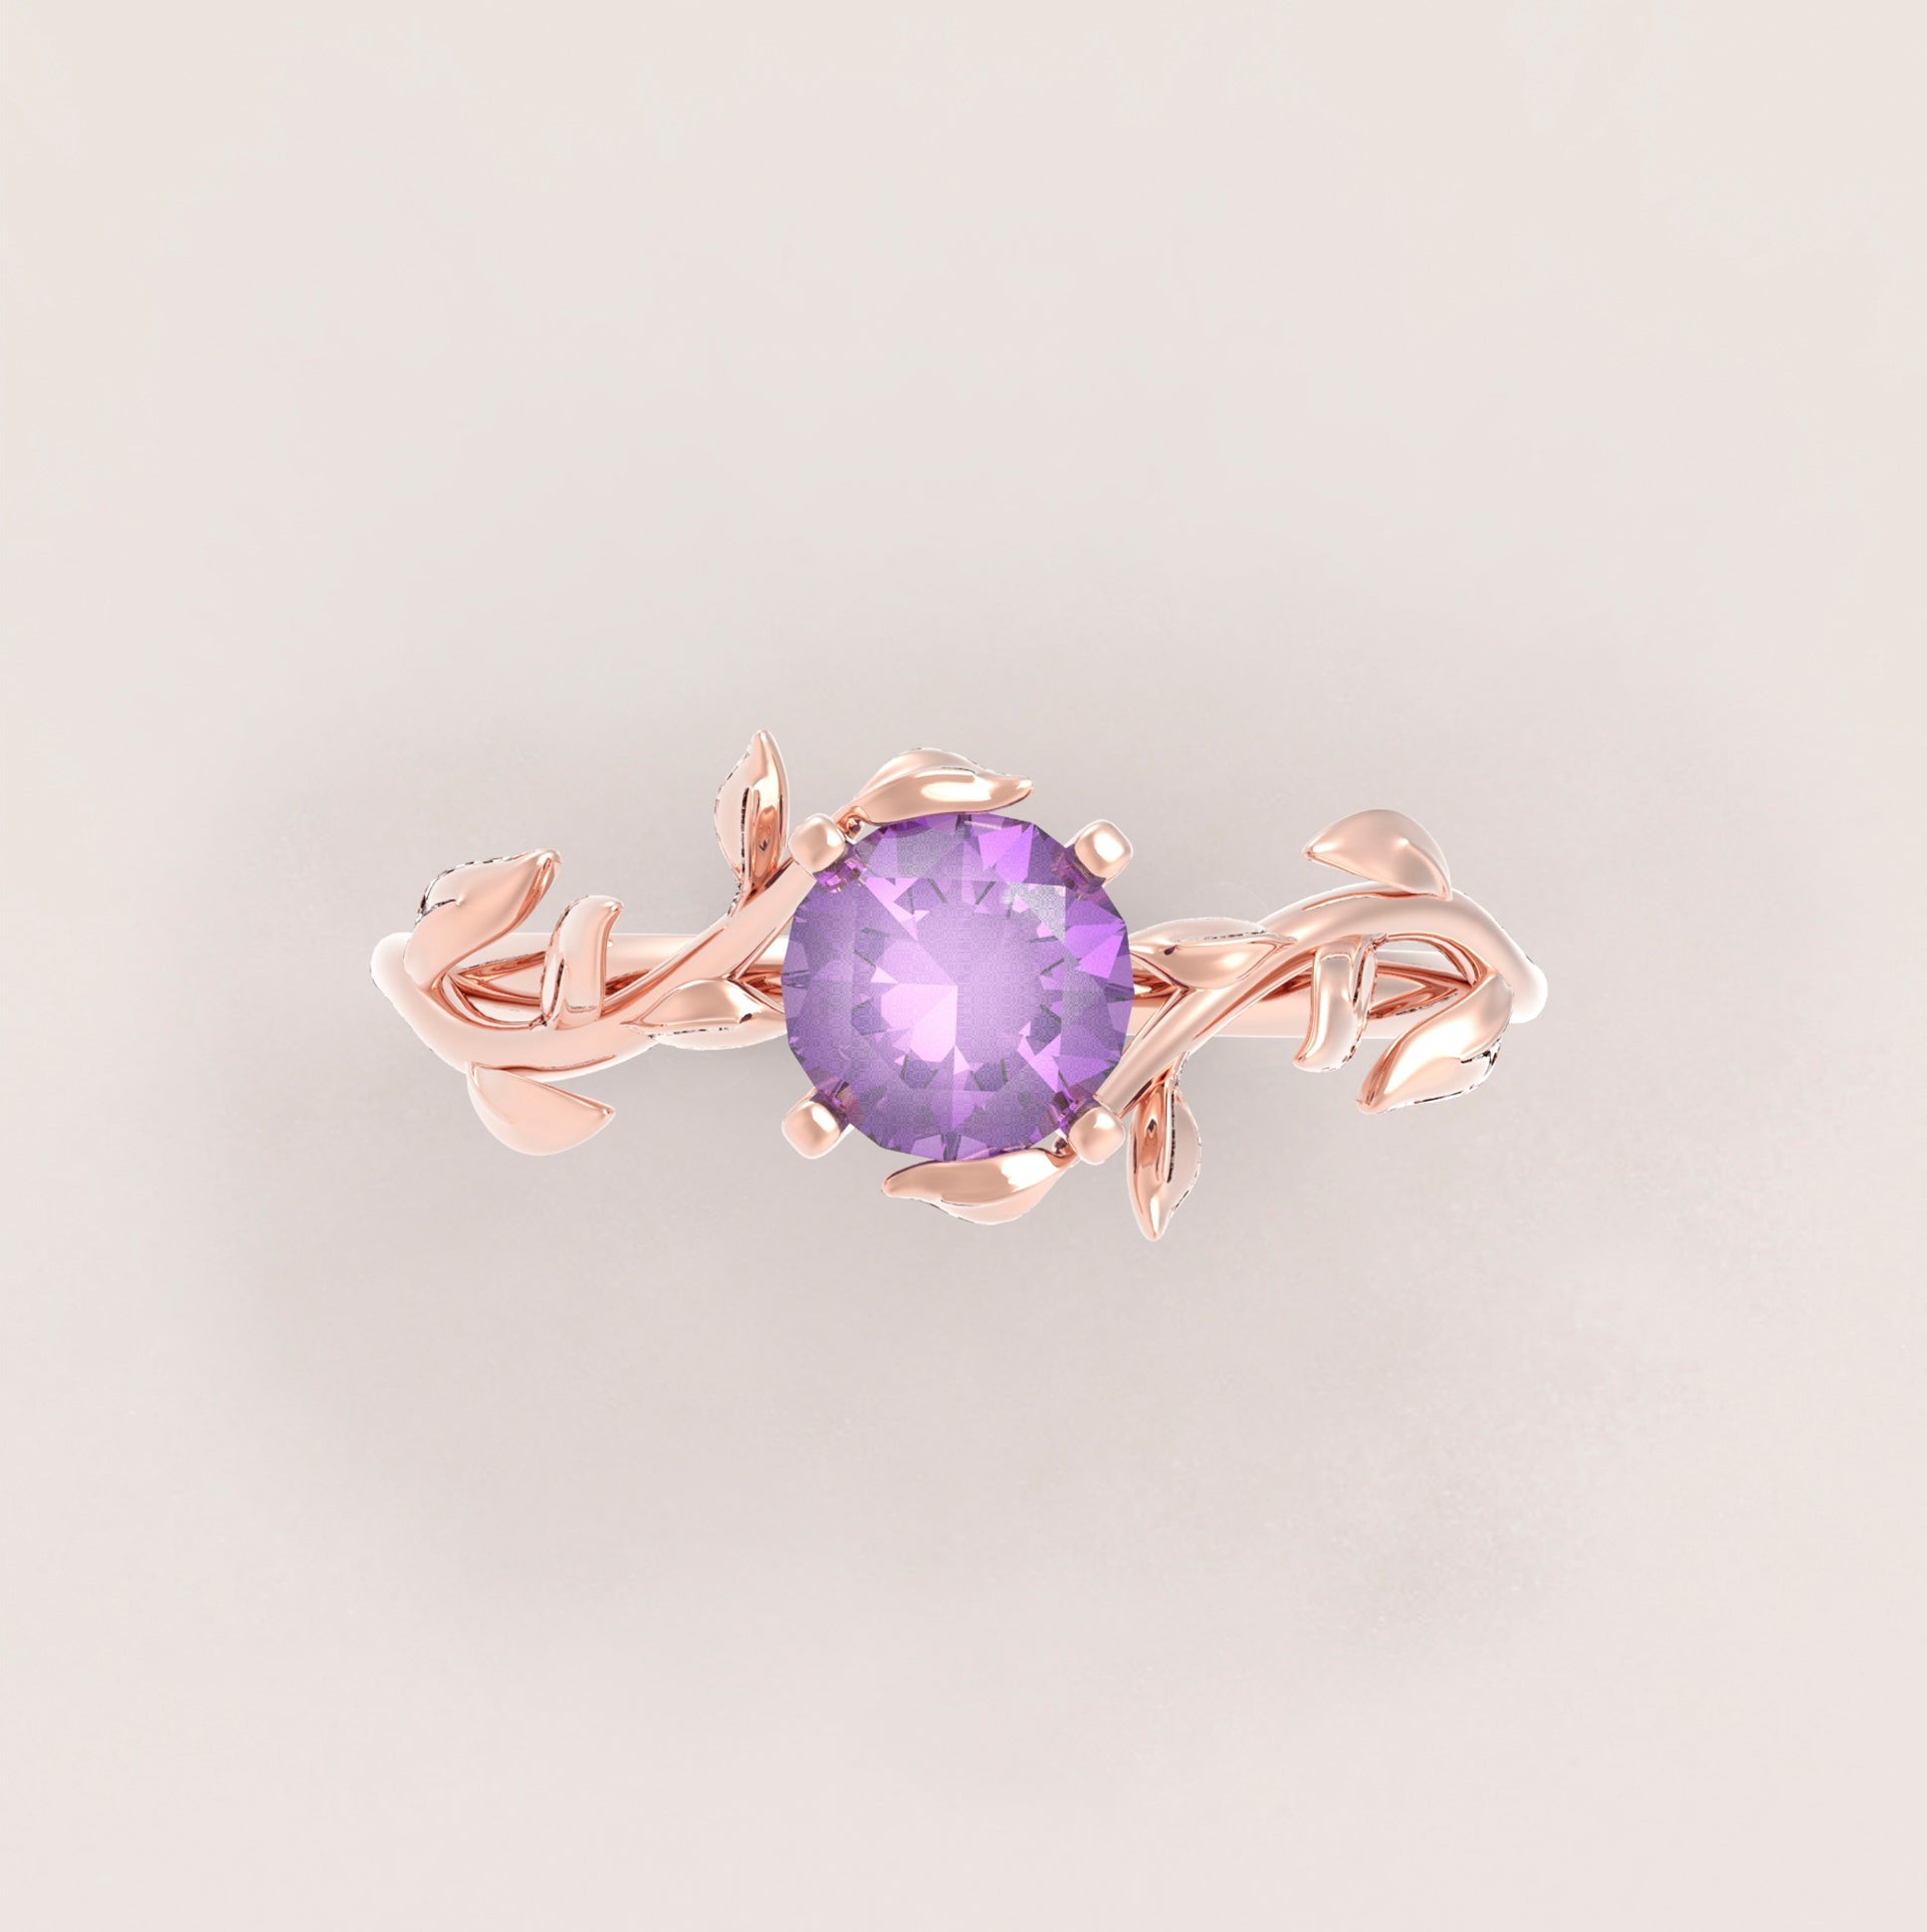 Unique Leaves Engagement Ring No.5 in Rose Gold - Amethyst - Roelavi